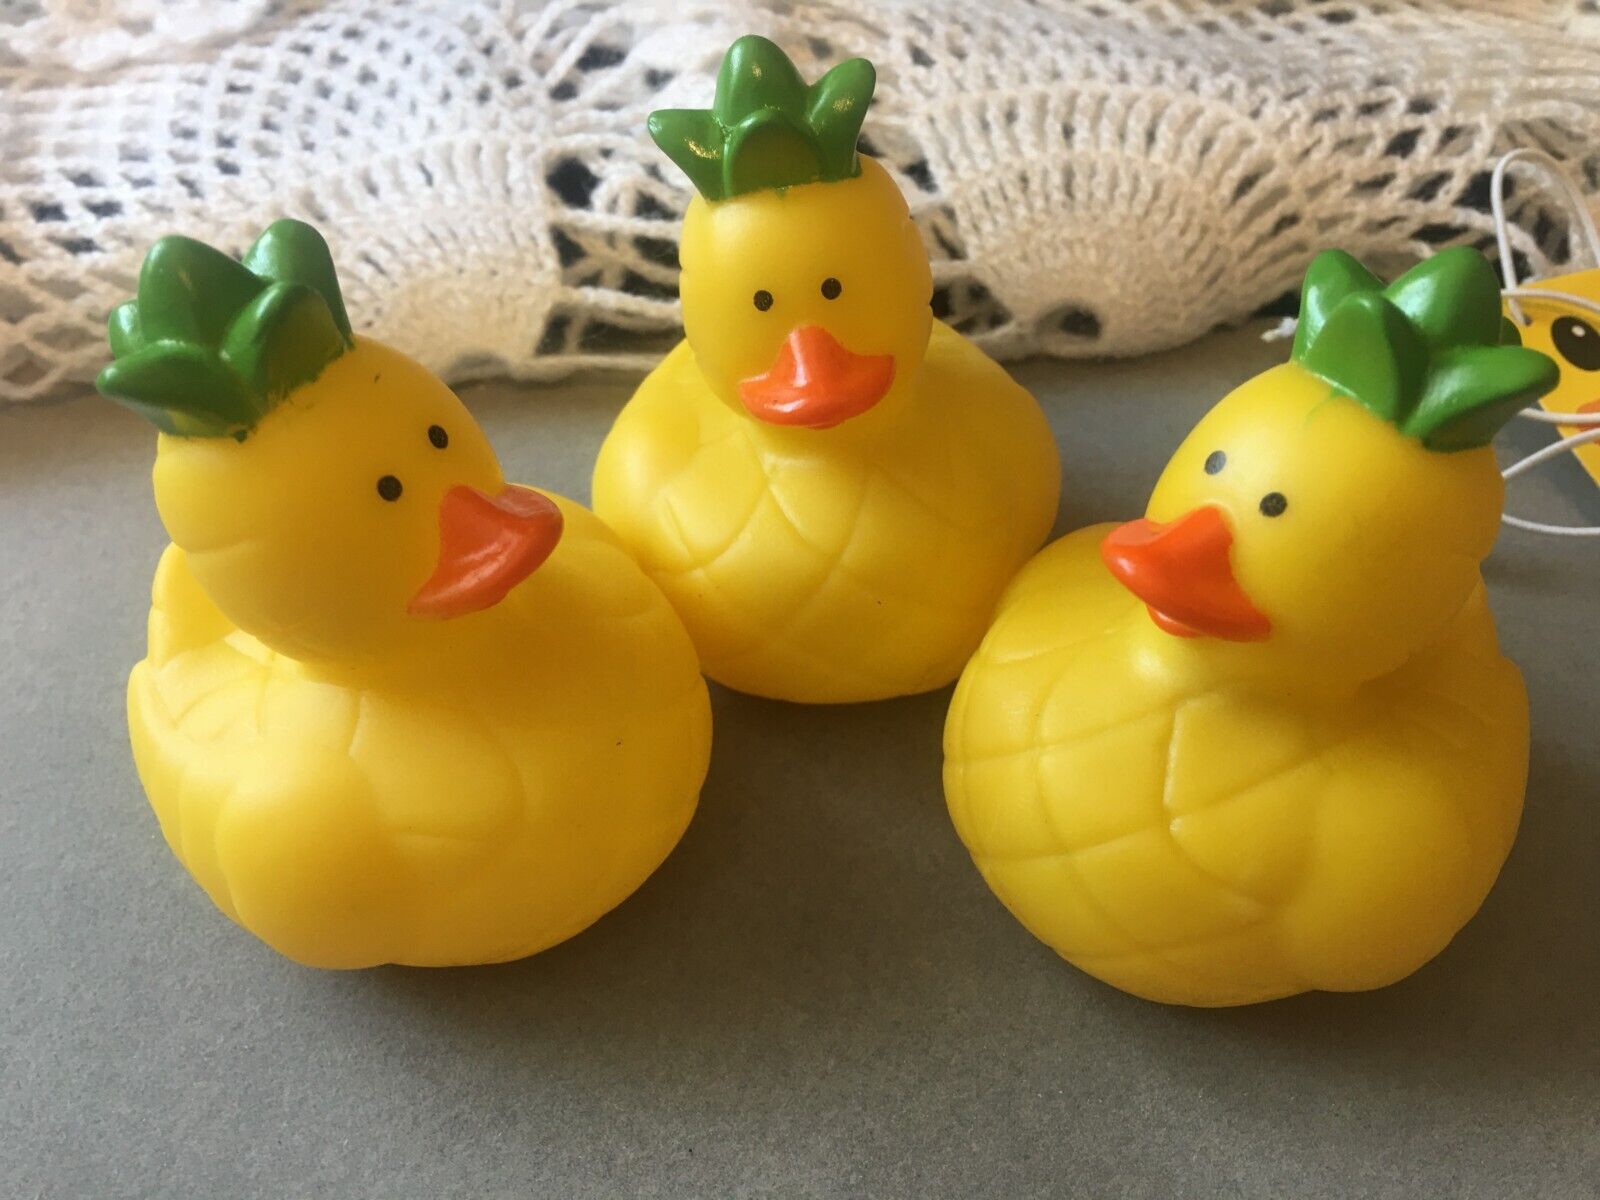 New 3 Lot RUBBER DUCKIES "You've Been Ducked!" Jeep Ducks +Cards Celebration 2x2 OTC 12/3854 - фотография #3